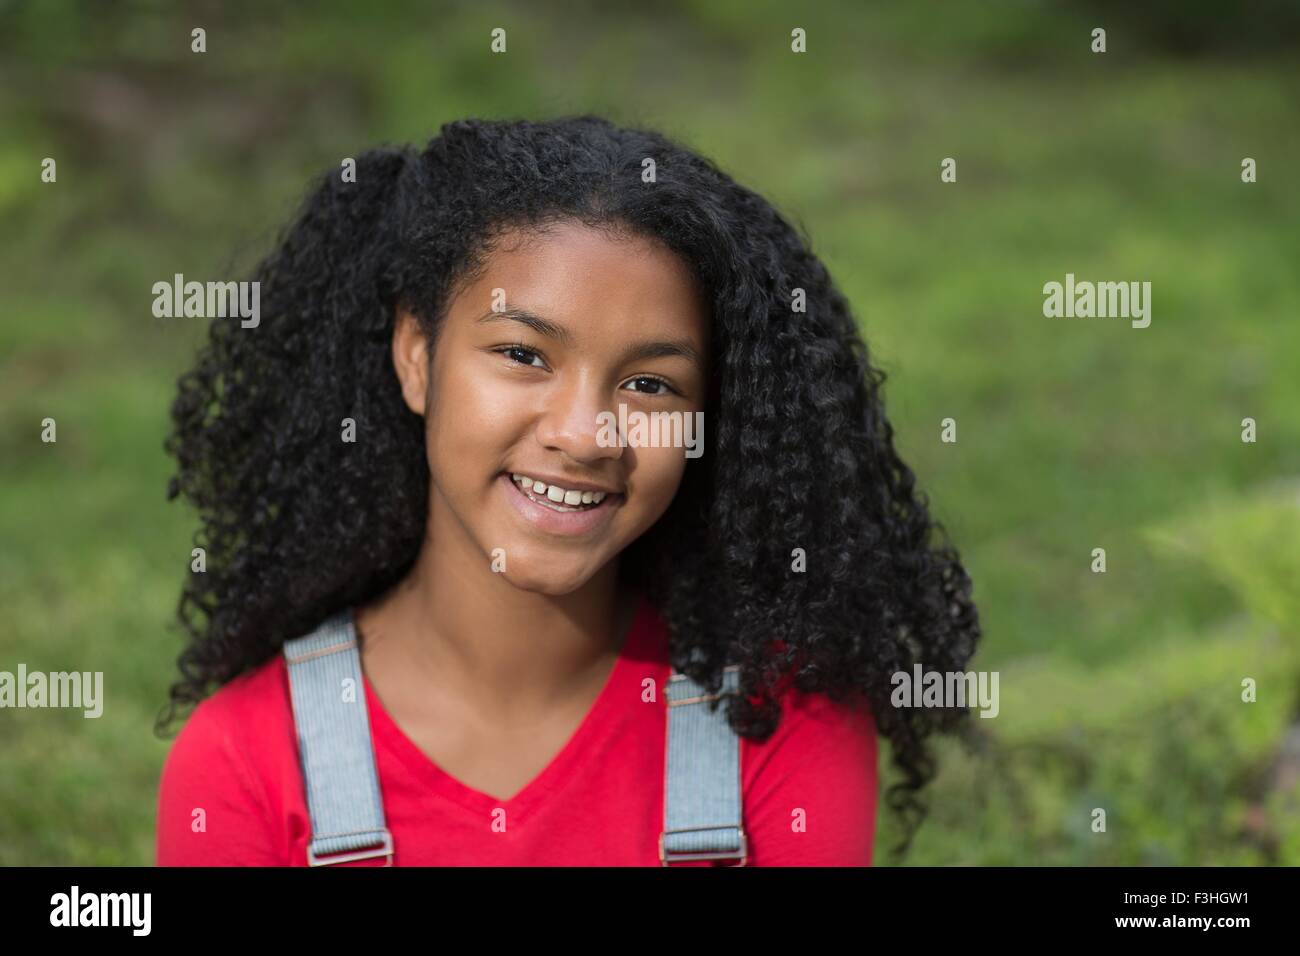 Portrait of girl with black curly hair looking at camera smiling Stock Photo